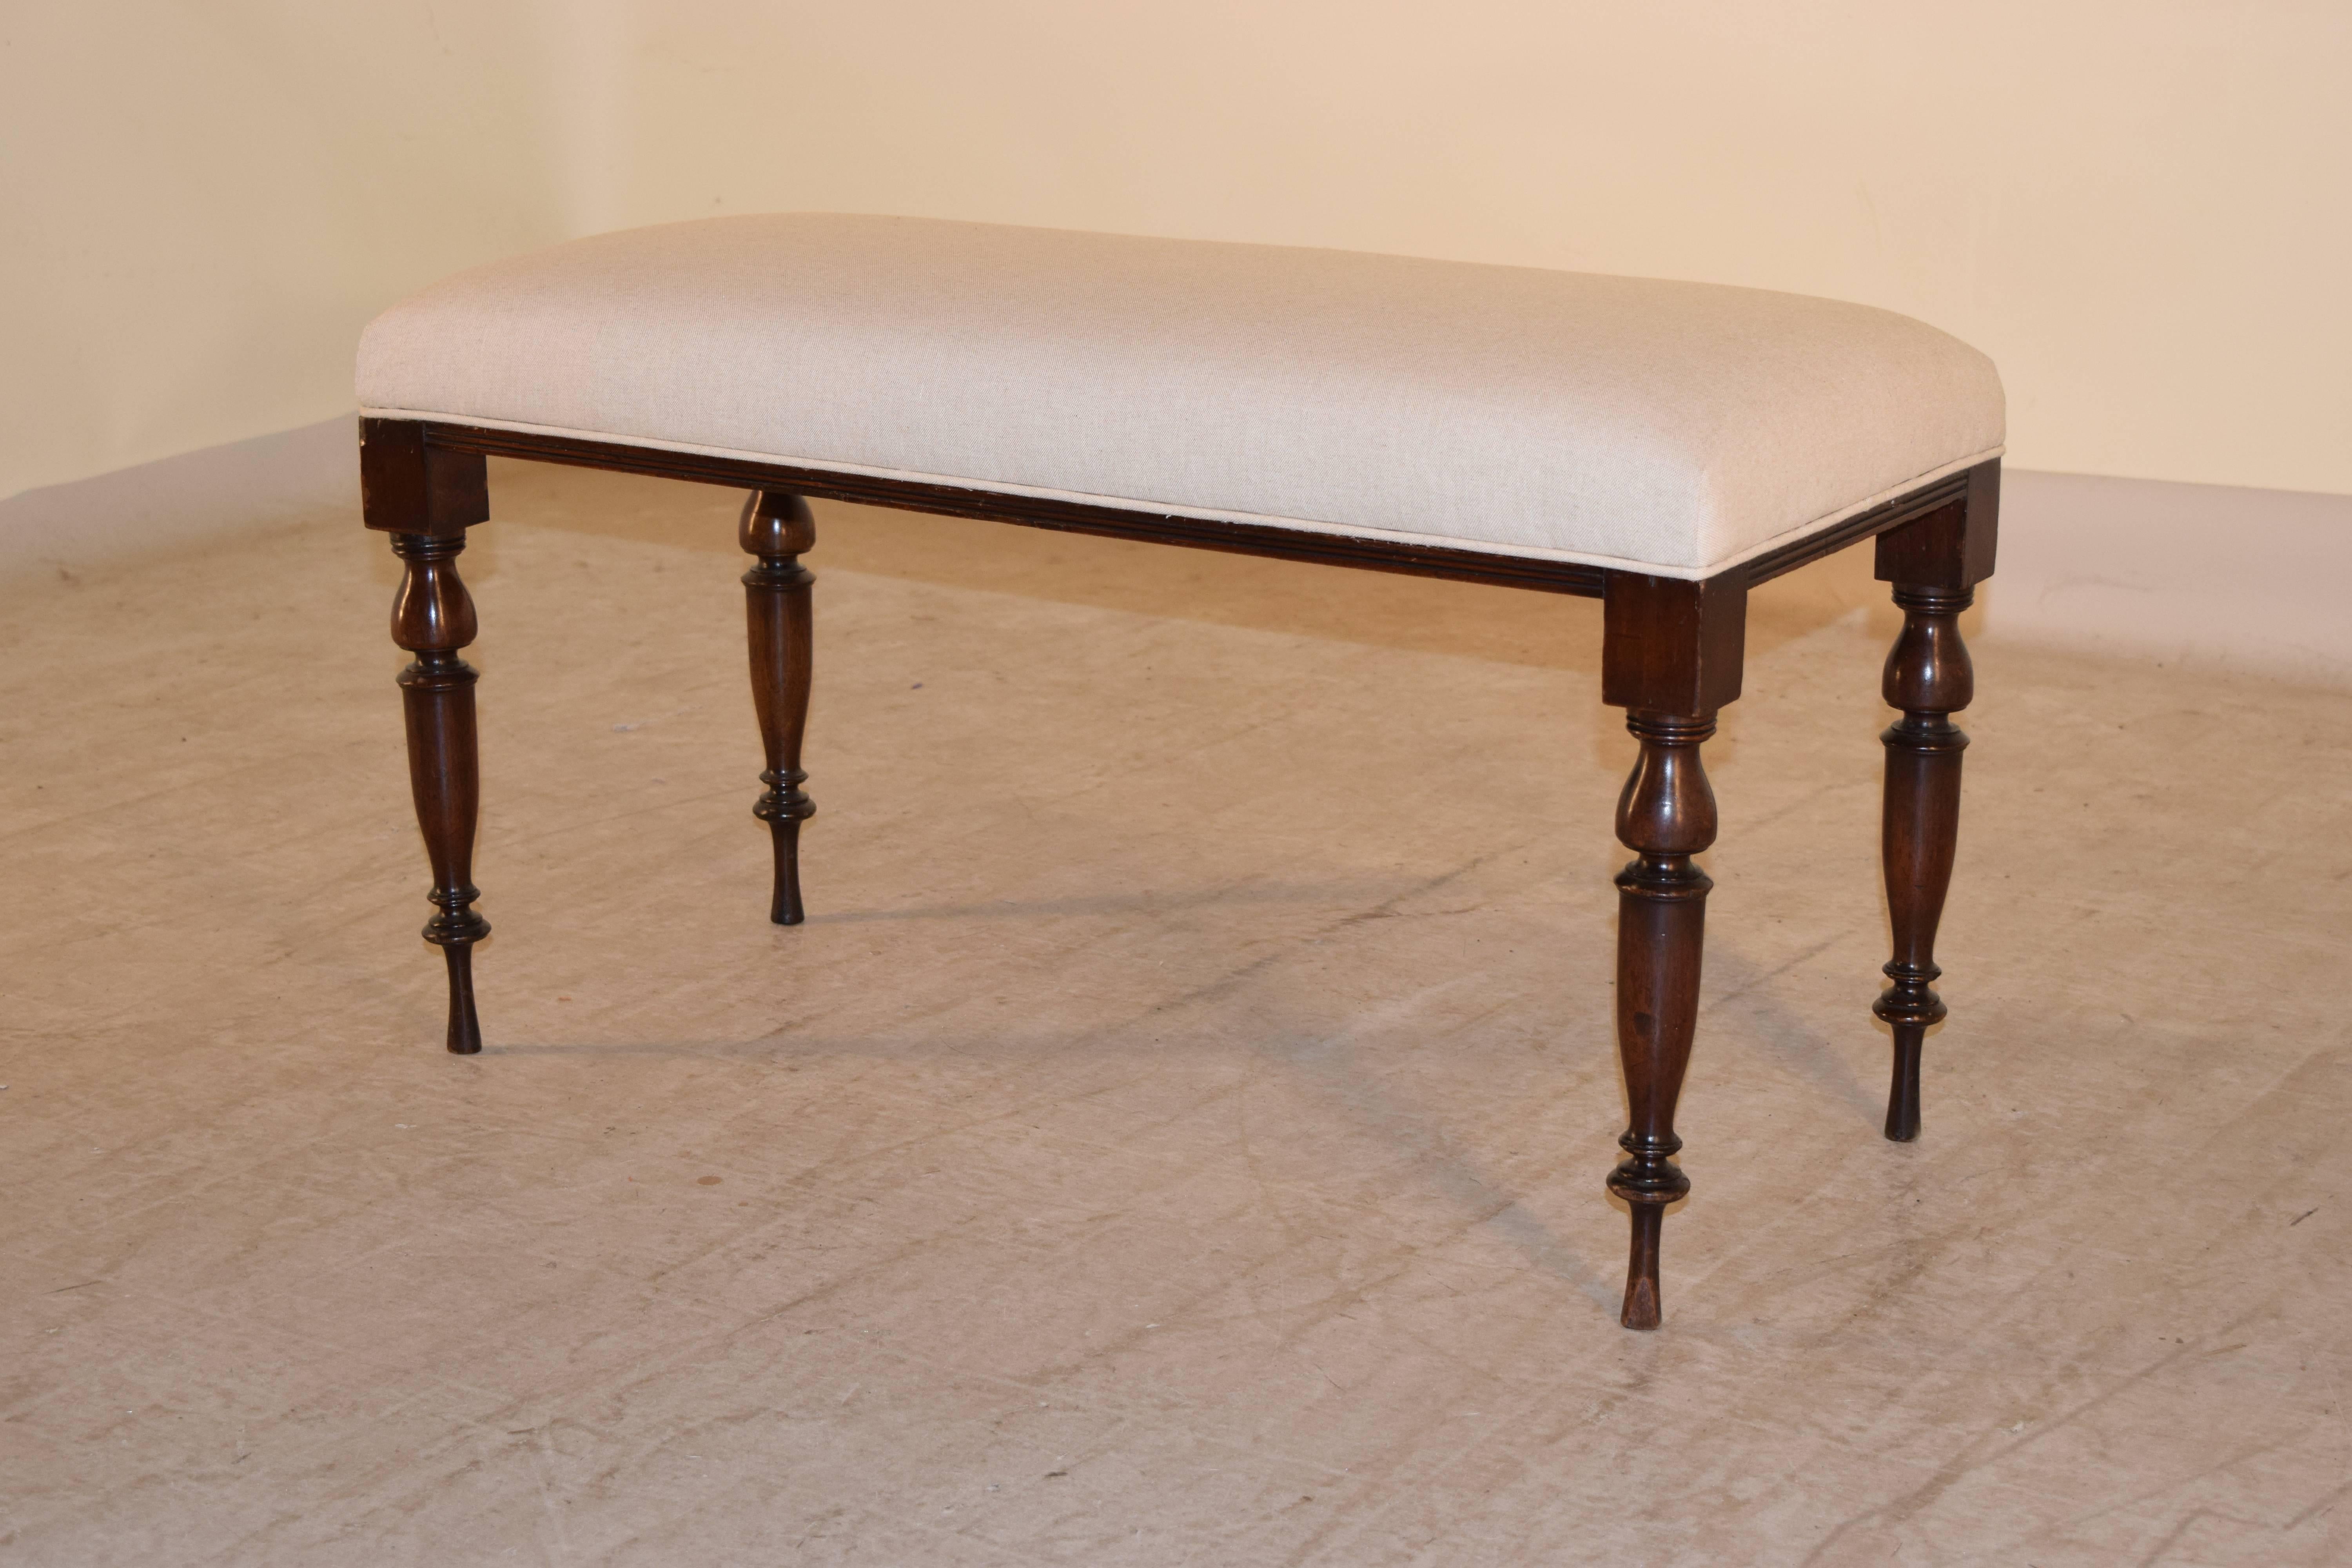 19th century English bench made from mahogany with lovely and elegantly hand-turned legs. Newly upholstered in linen and finished with a single welt.